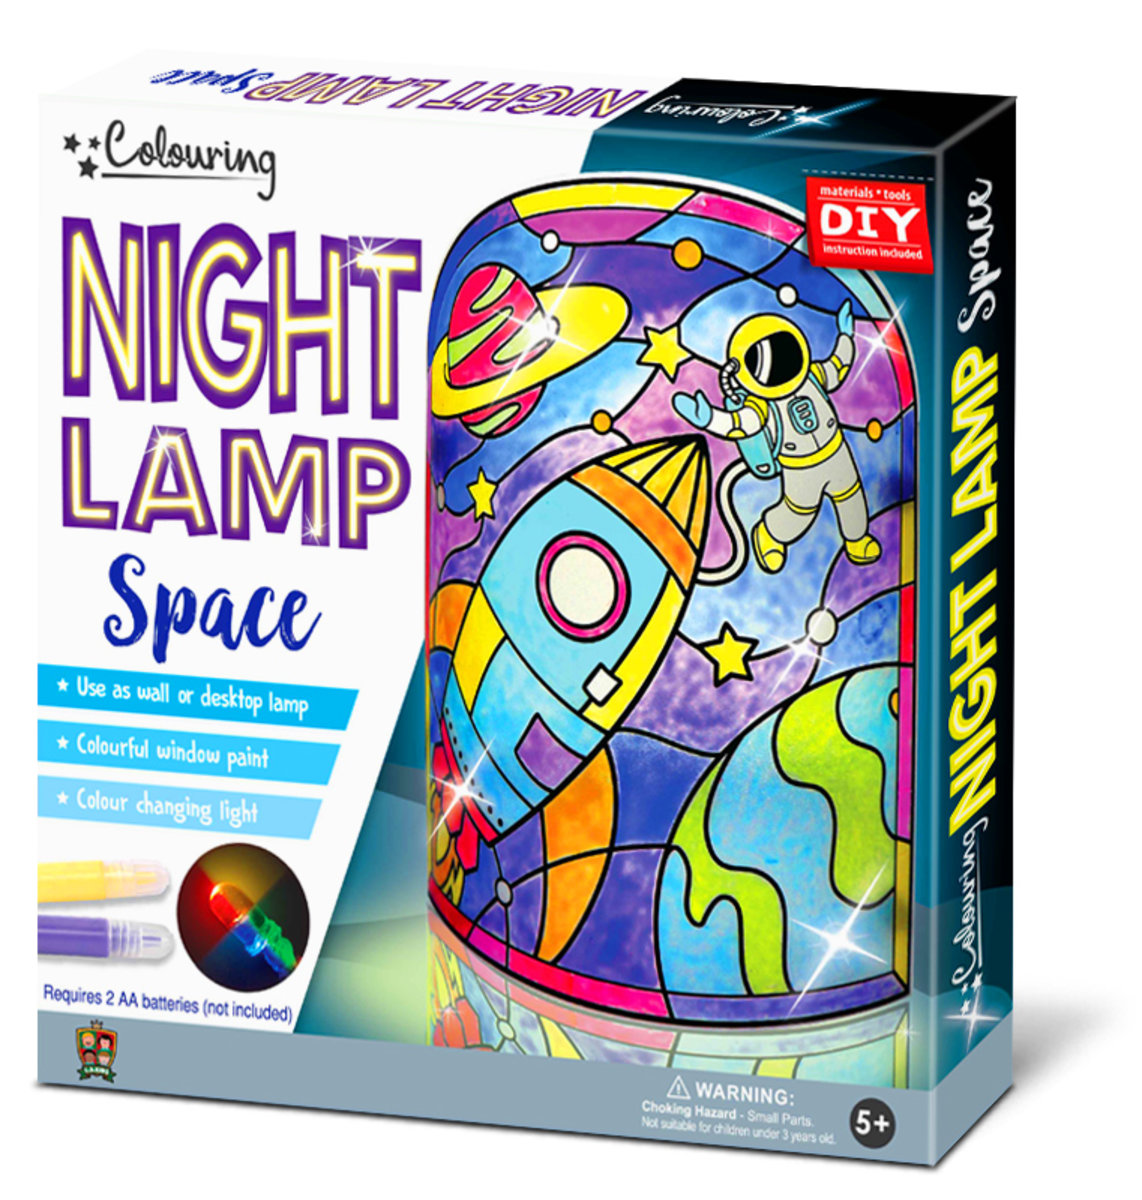 DIY Magic World | Space Night Lamp Kit for Kids - Stained Glass, Color Changing LED Bedroom Light